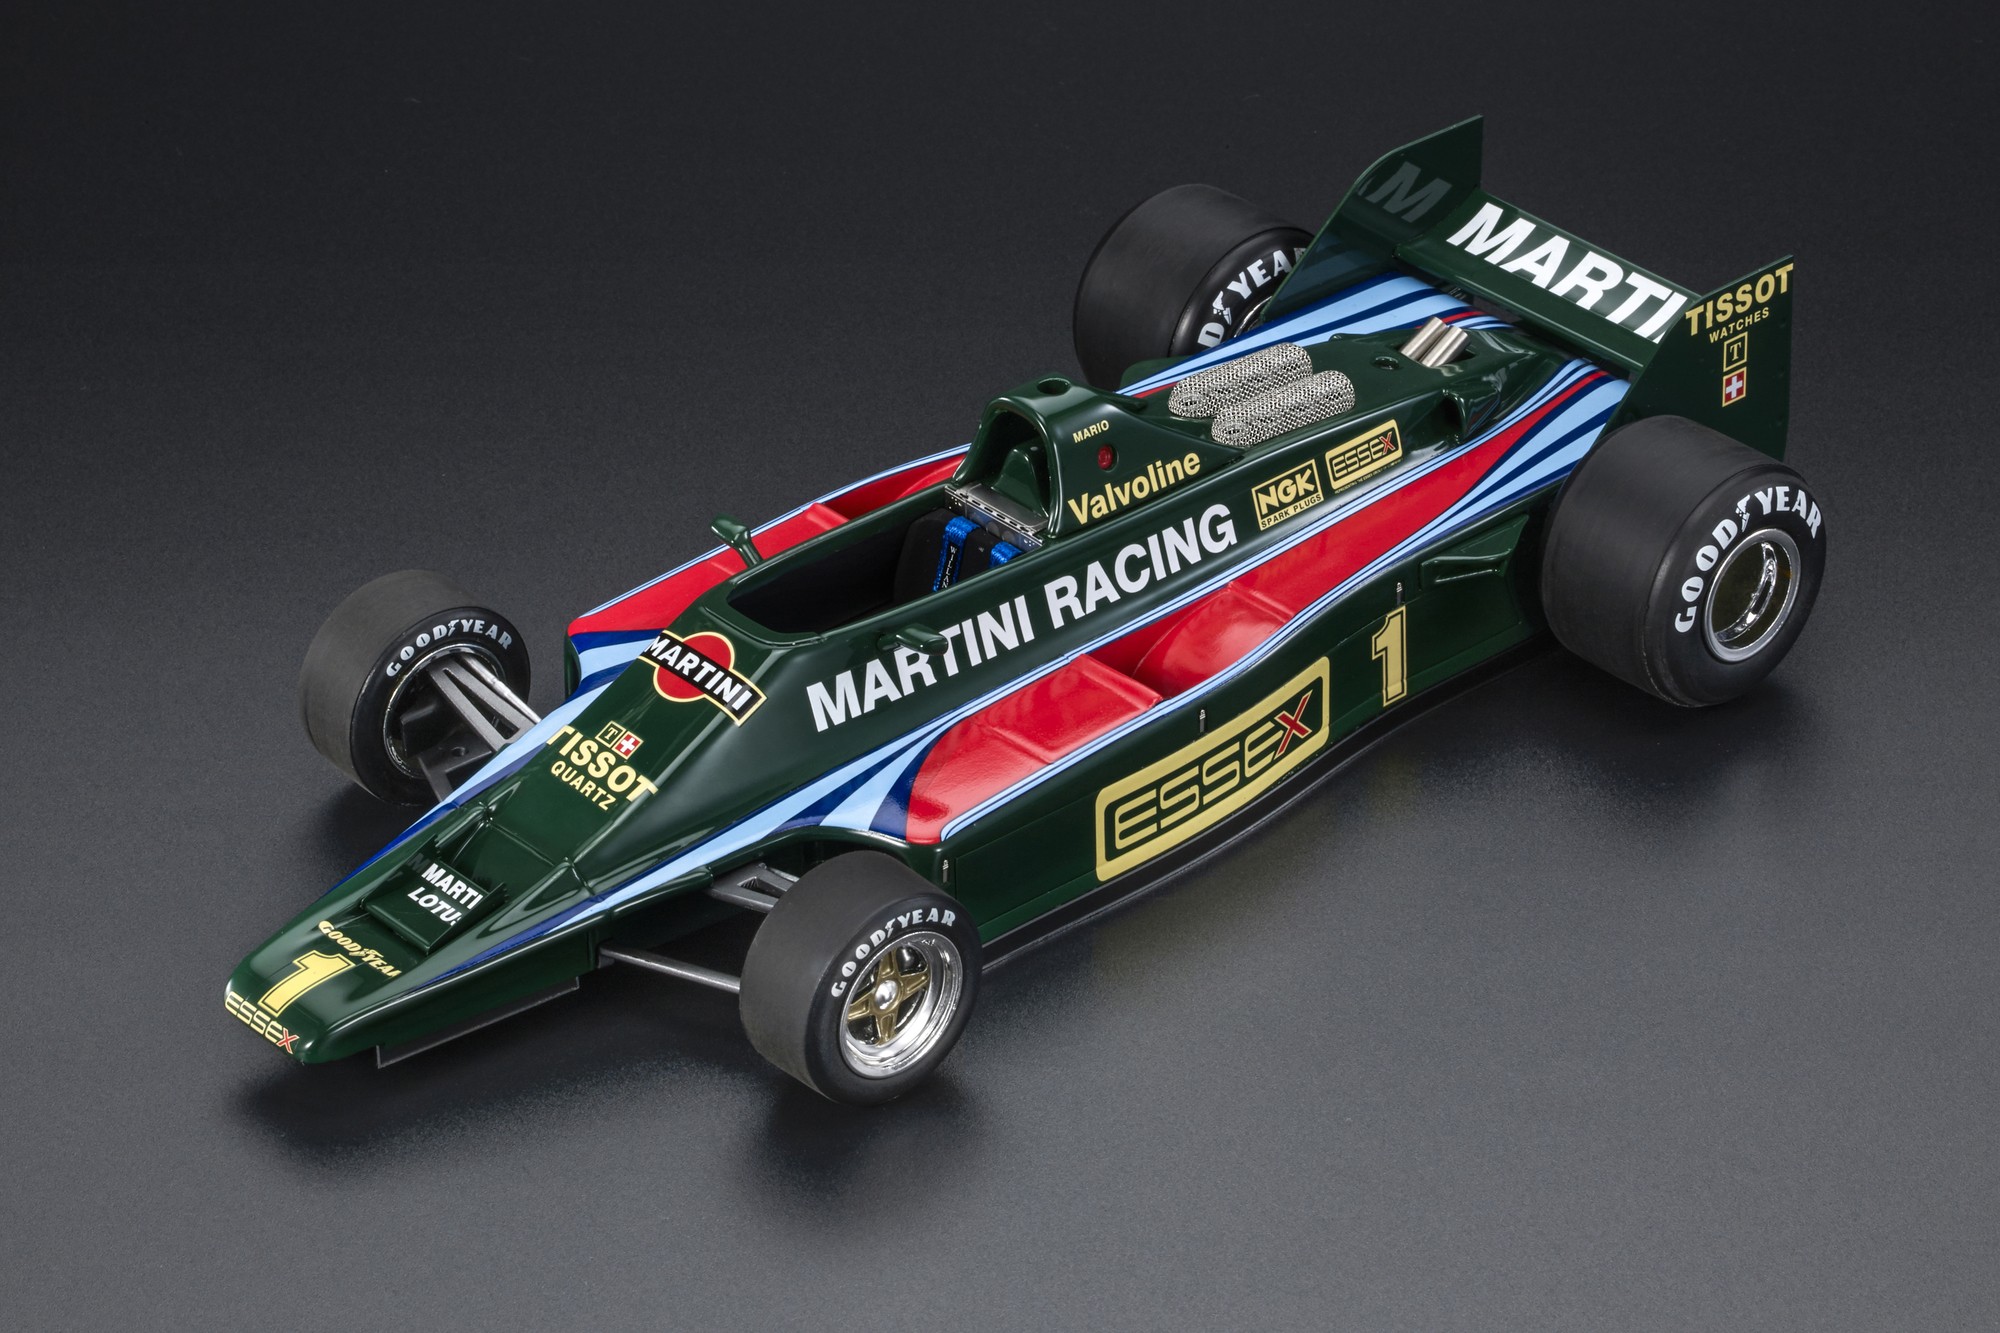 GP Replicas 18 ミニカー レジン プロポーションモデル 1979年シーズン ロータス LOTUS TYPE 80 MARTINI RACING No.1 (WITHOUT FRONT WINGS) TEST 1979 MARIO ANDRETTI